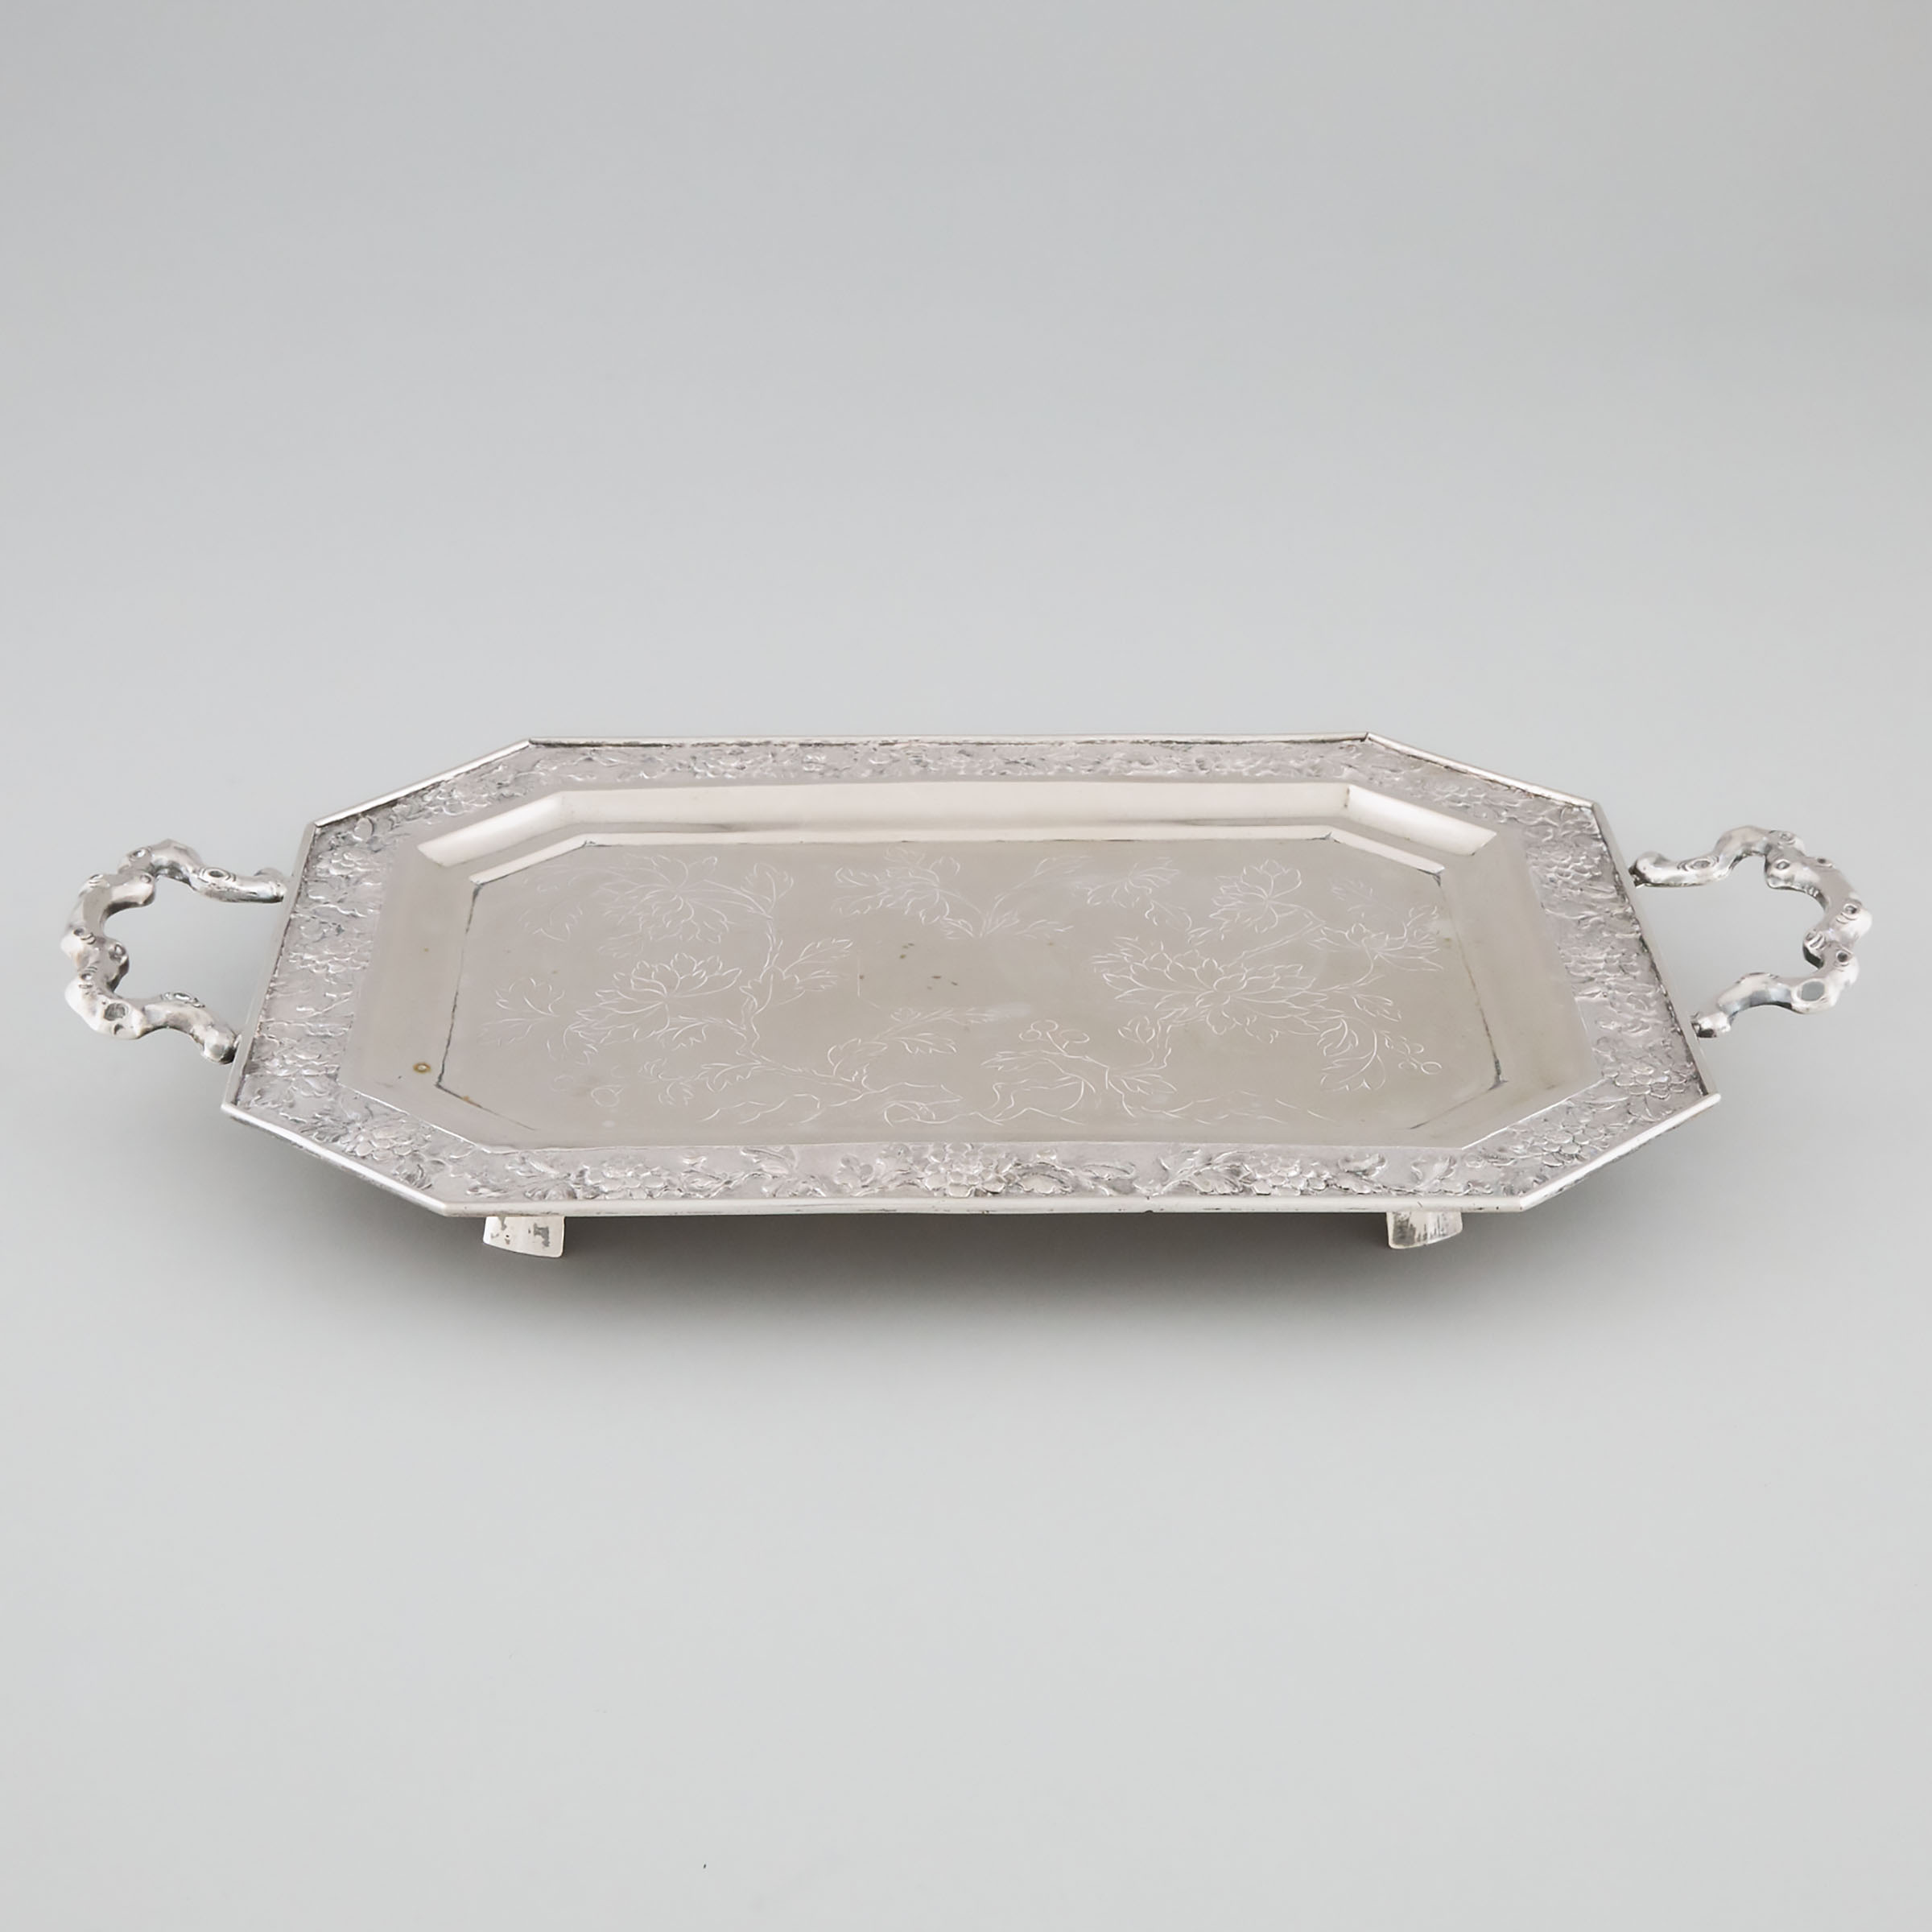 Chinese Silver Two-Handled Octagonal Tray, early 20th century